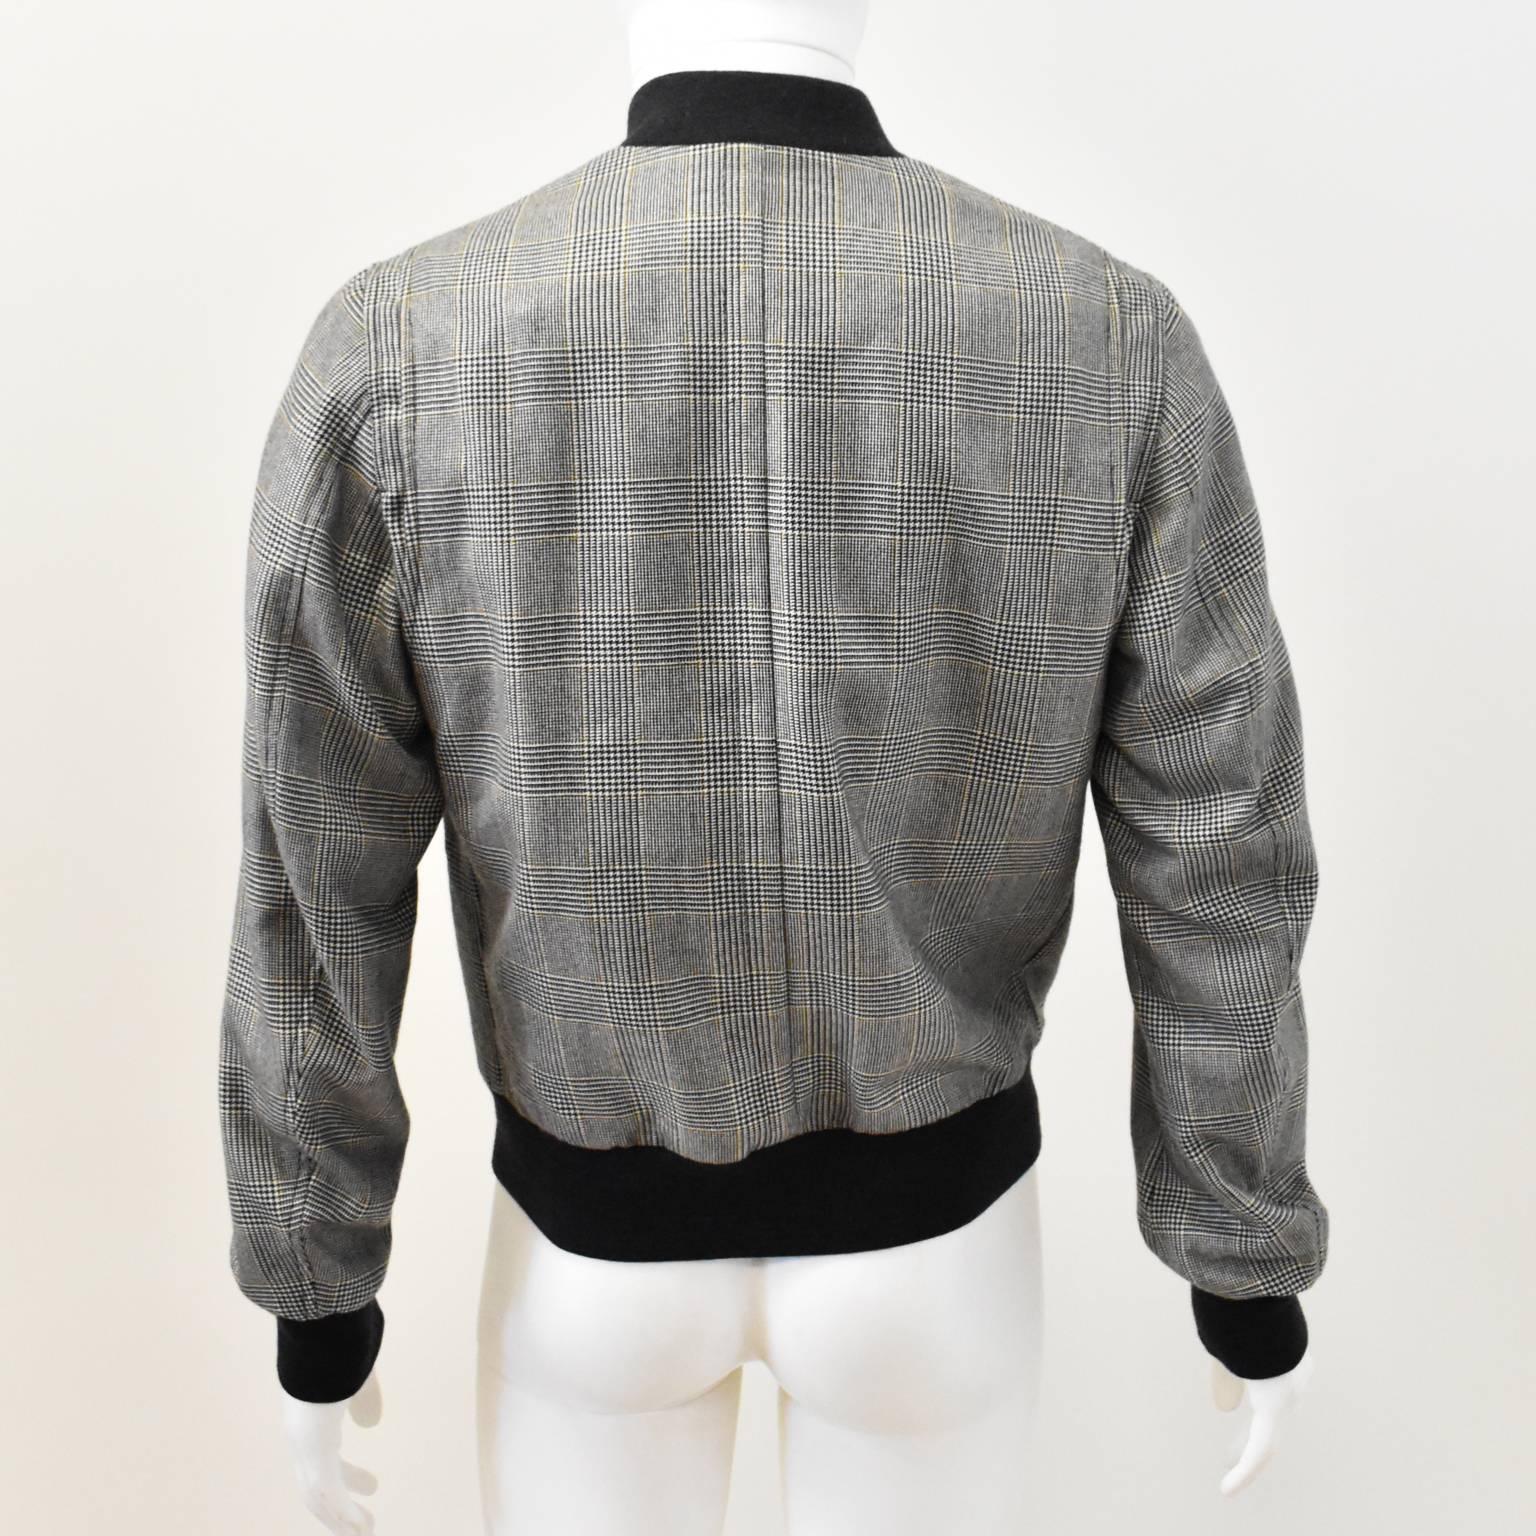 Alexander McQueen Grey Prince of Wales Check Cashmere Bomber Jacket A/W 14 In Good Condition For Sale In London, GB